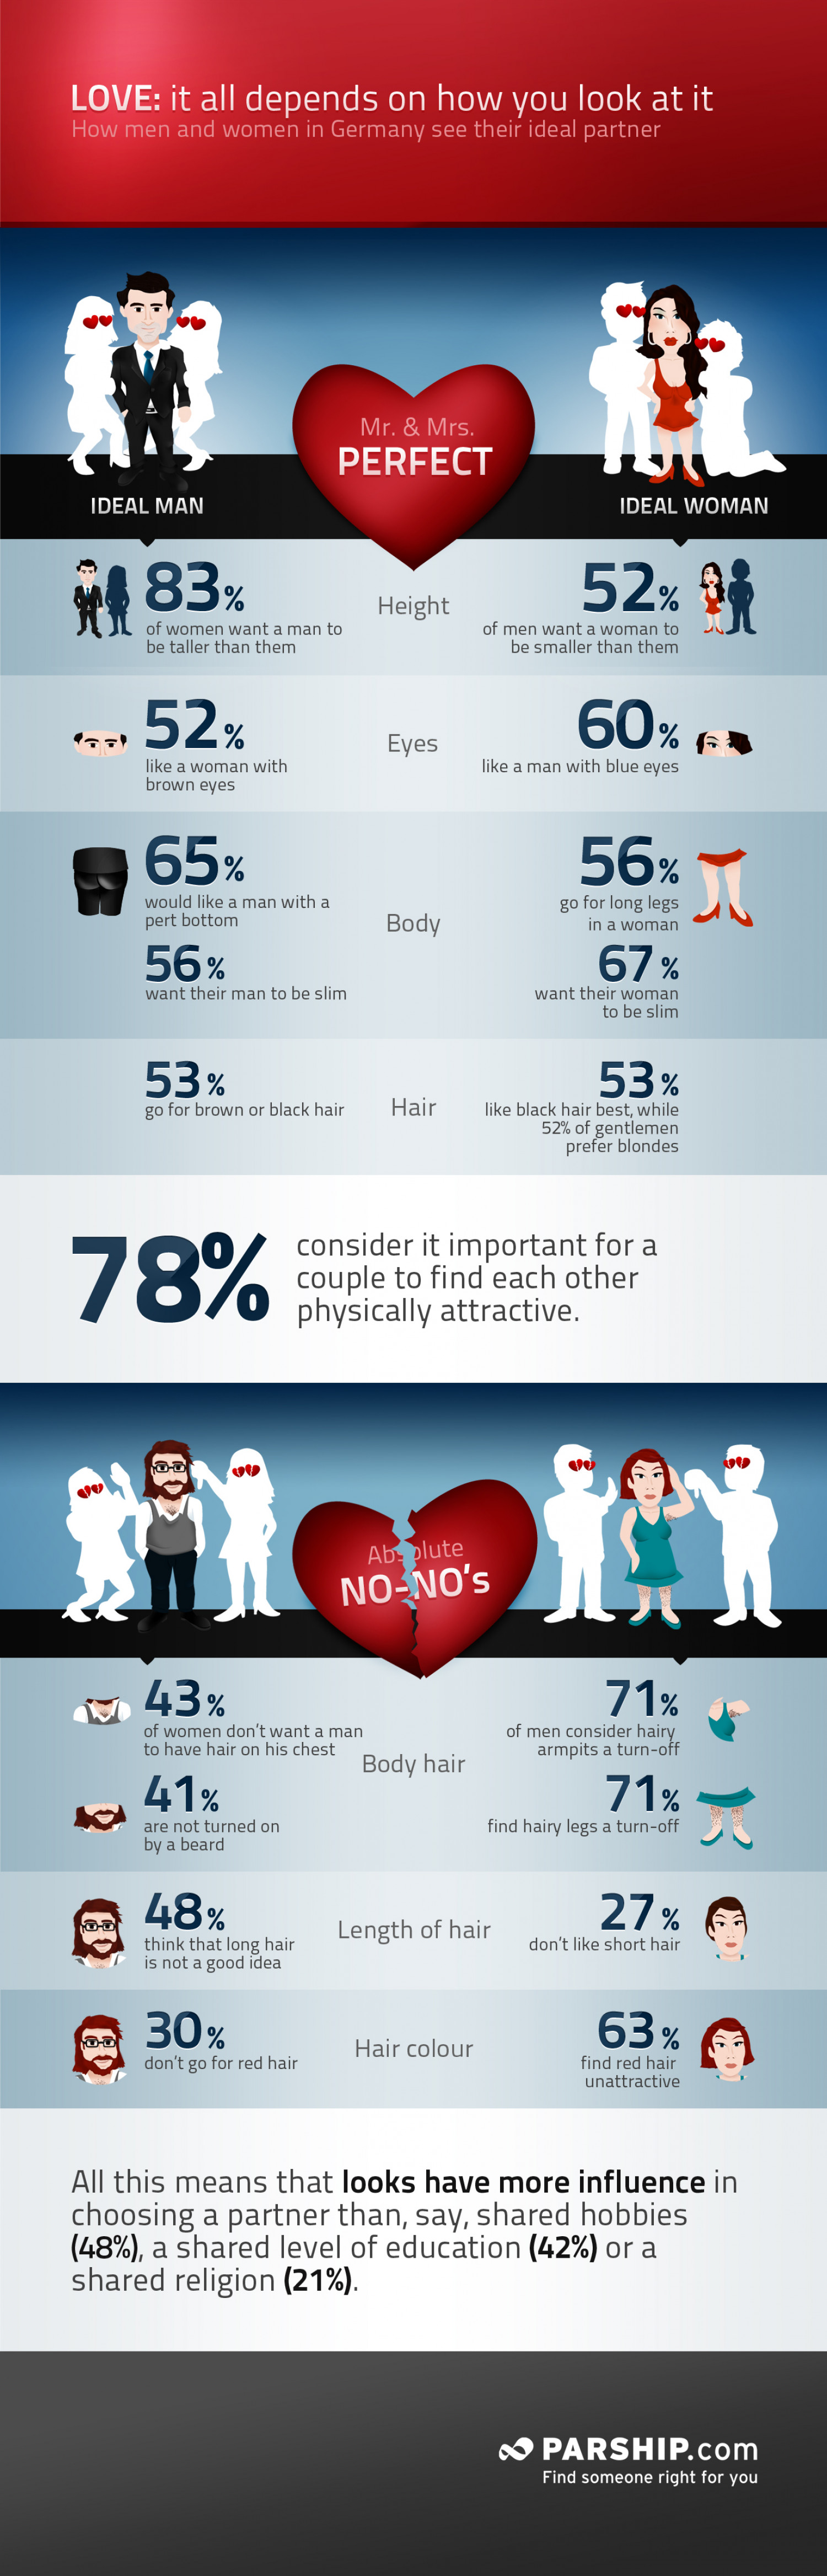 Mr & Mrs Perfect - How Germans picture their ideal man or ideal woman. Infographic